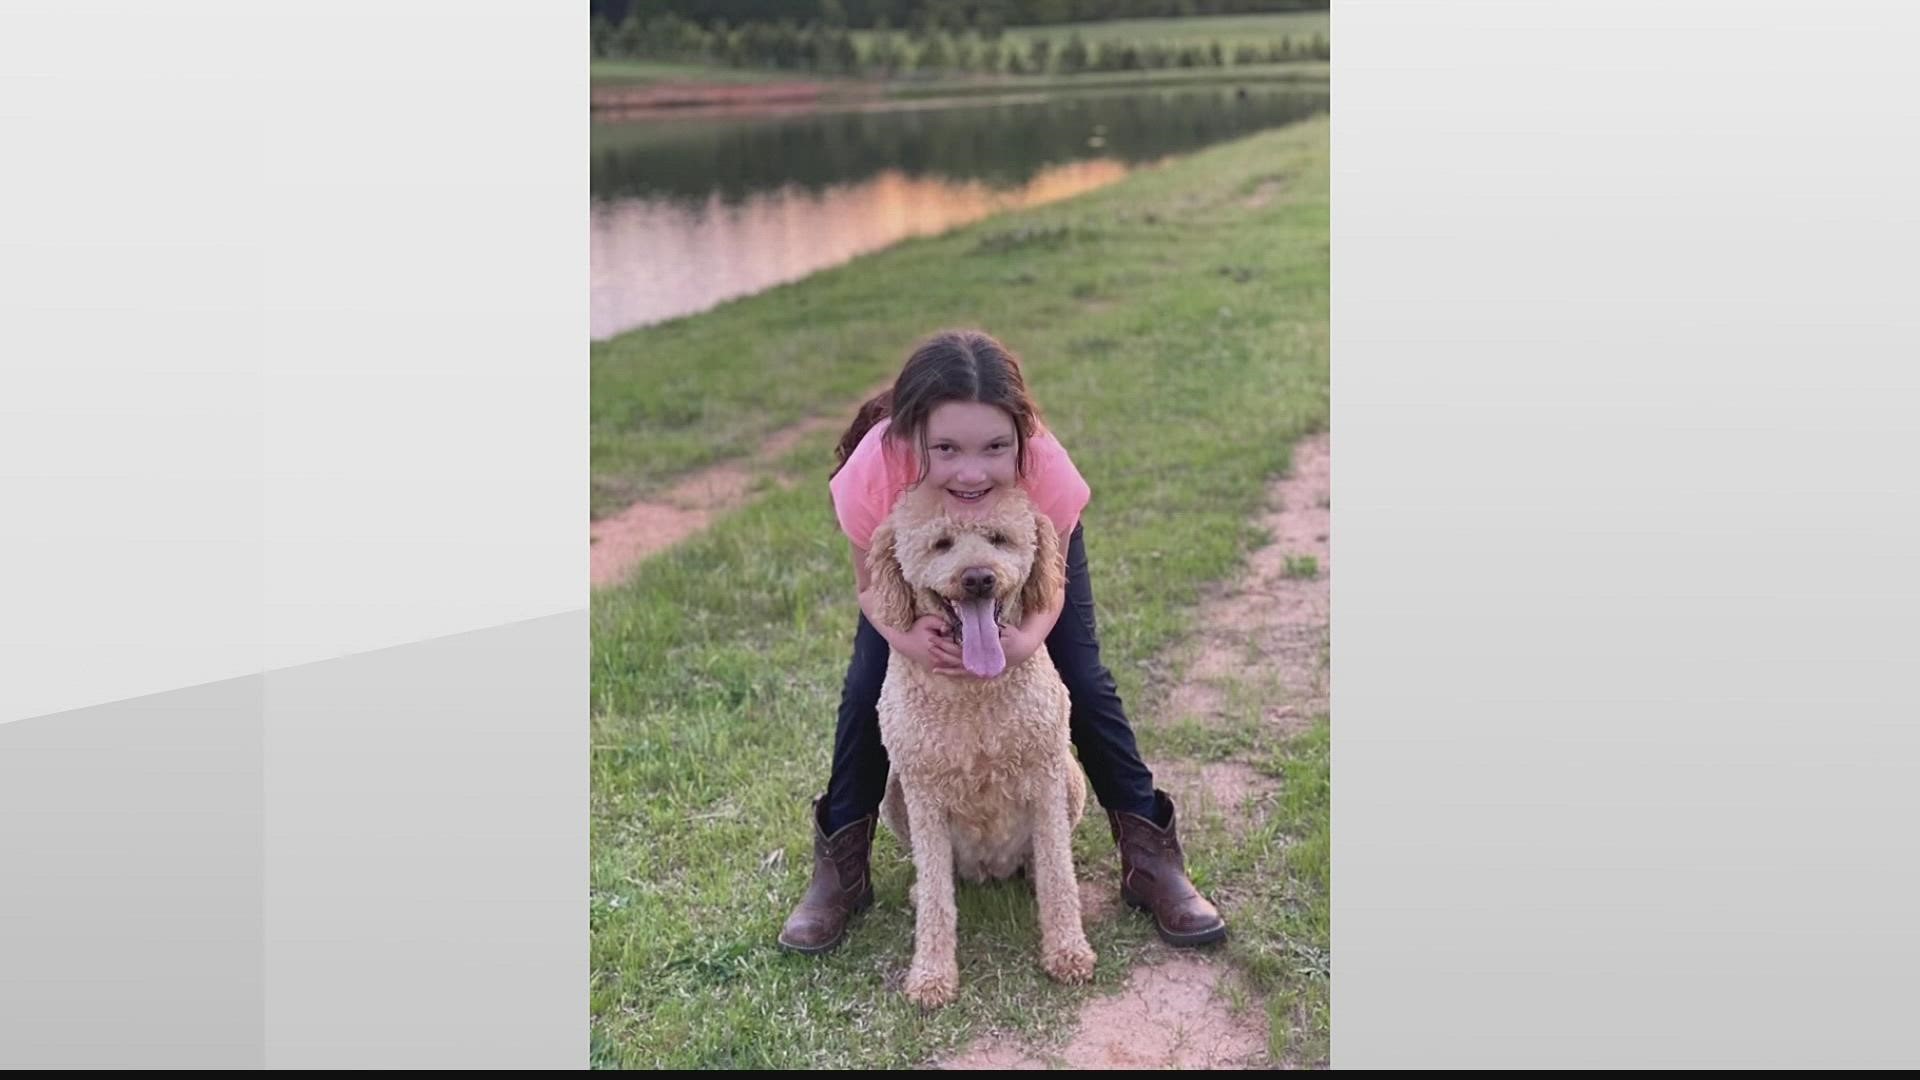 Charlie Jane was born with several heart defects and a rare genetic disorder. Her service dog Elsie has been by her side every step of the way.